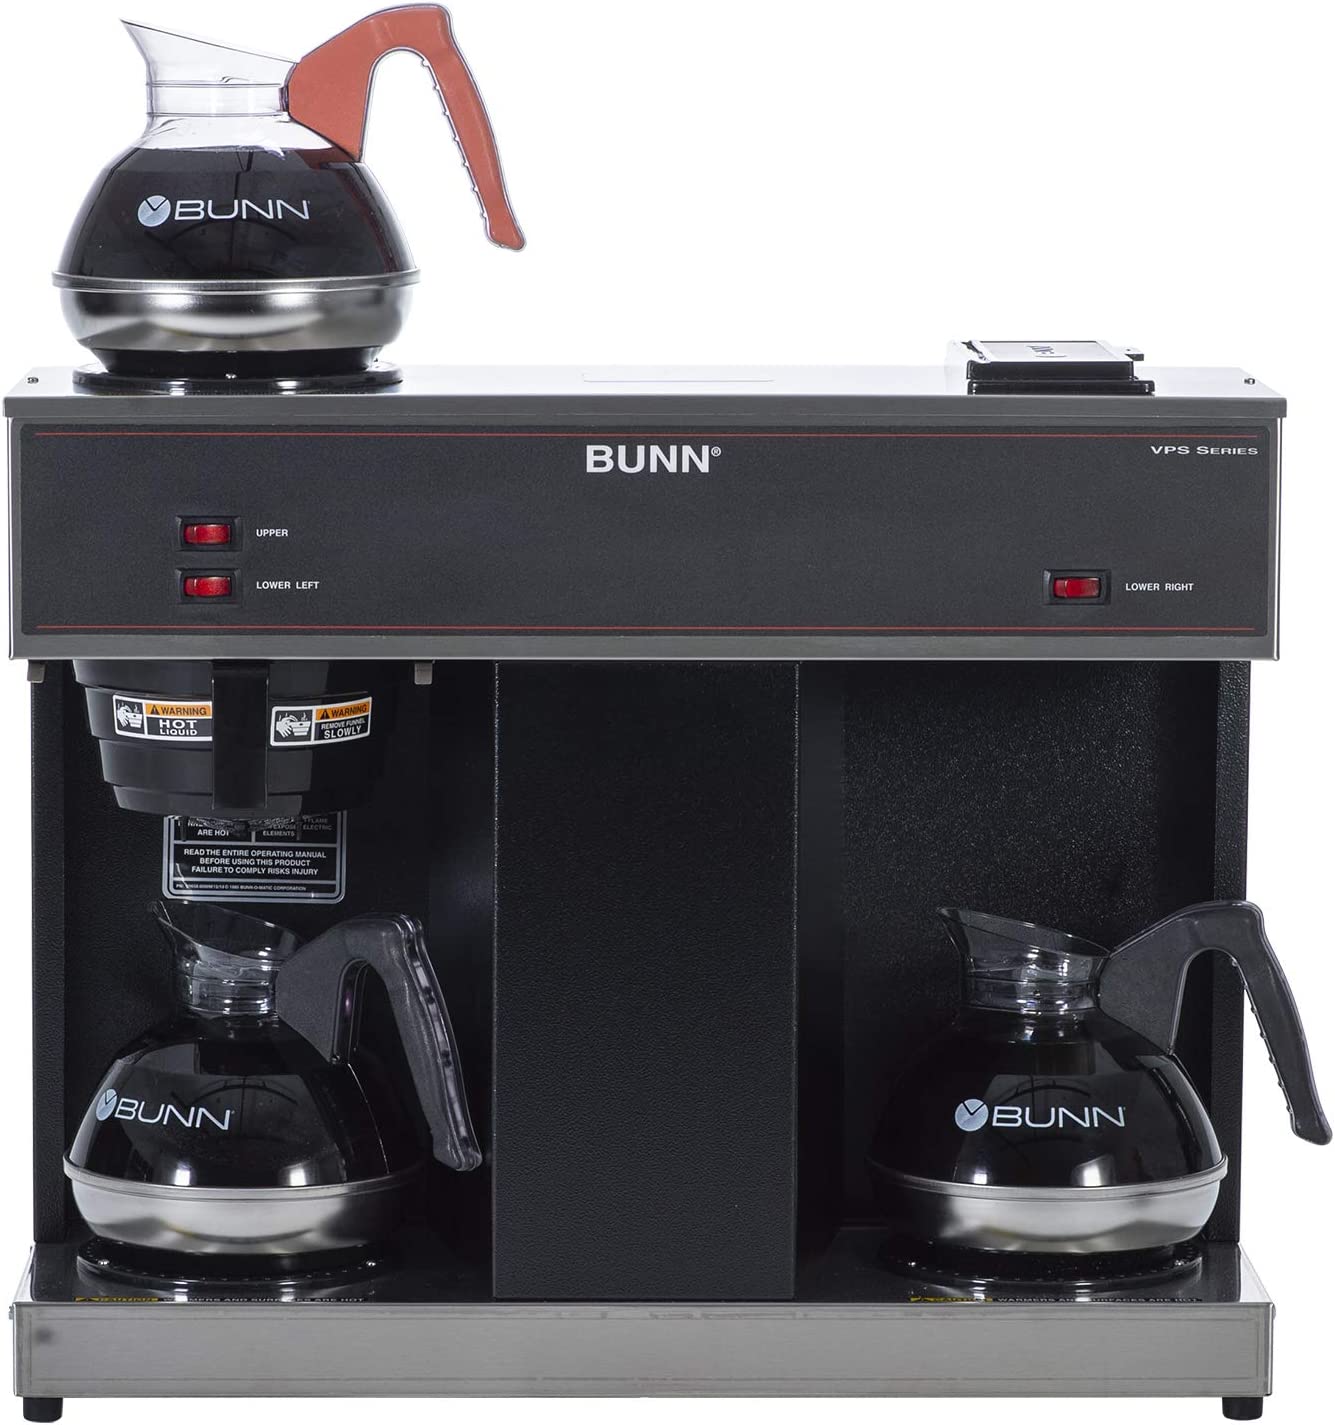 BUNN 04275.0031 VPS 12-Cup Pourover Commercial Coffee Brewer, with 3 Warming Stations